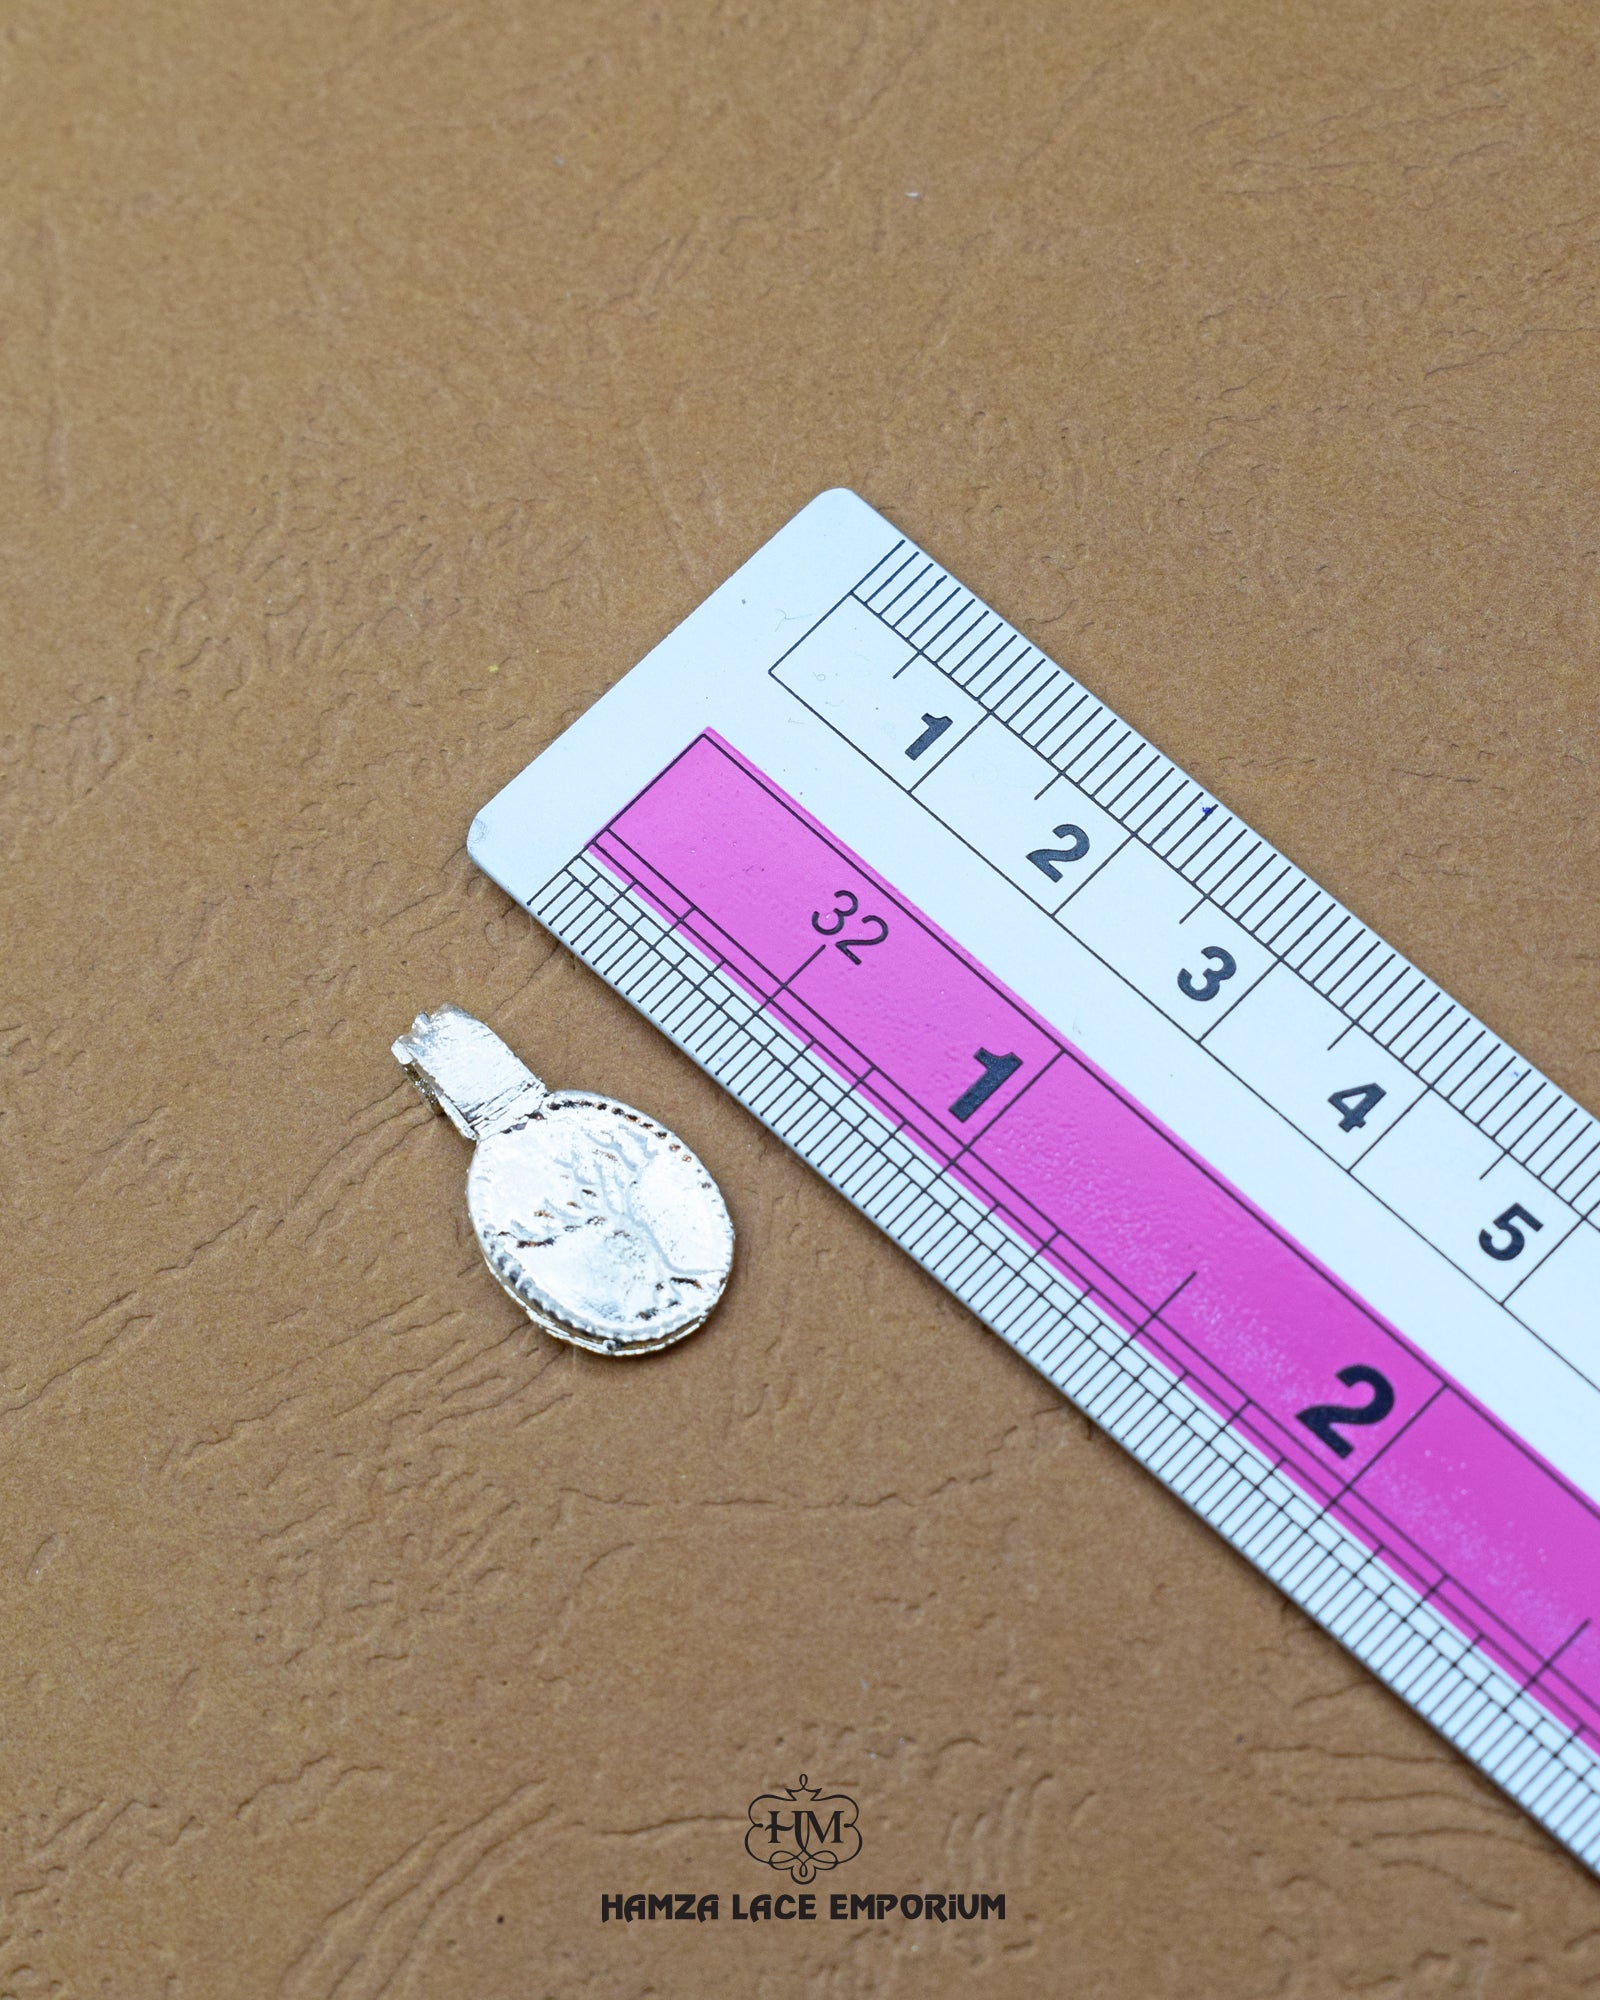 The 'Metal Coin MA211' size is showcased using a ruler for precise measurement.